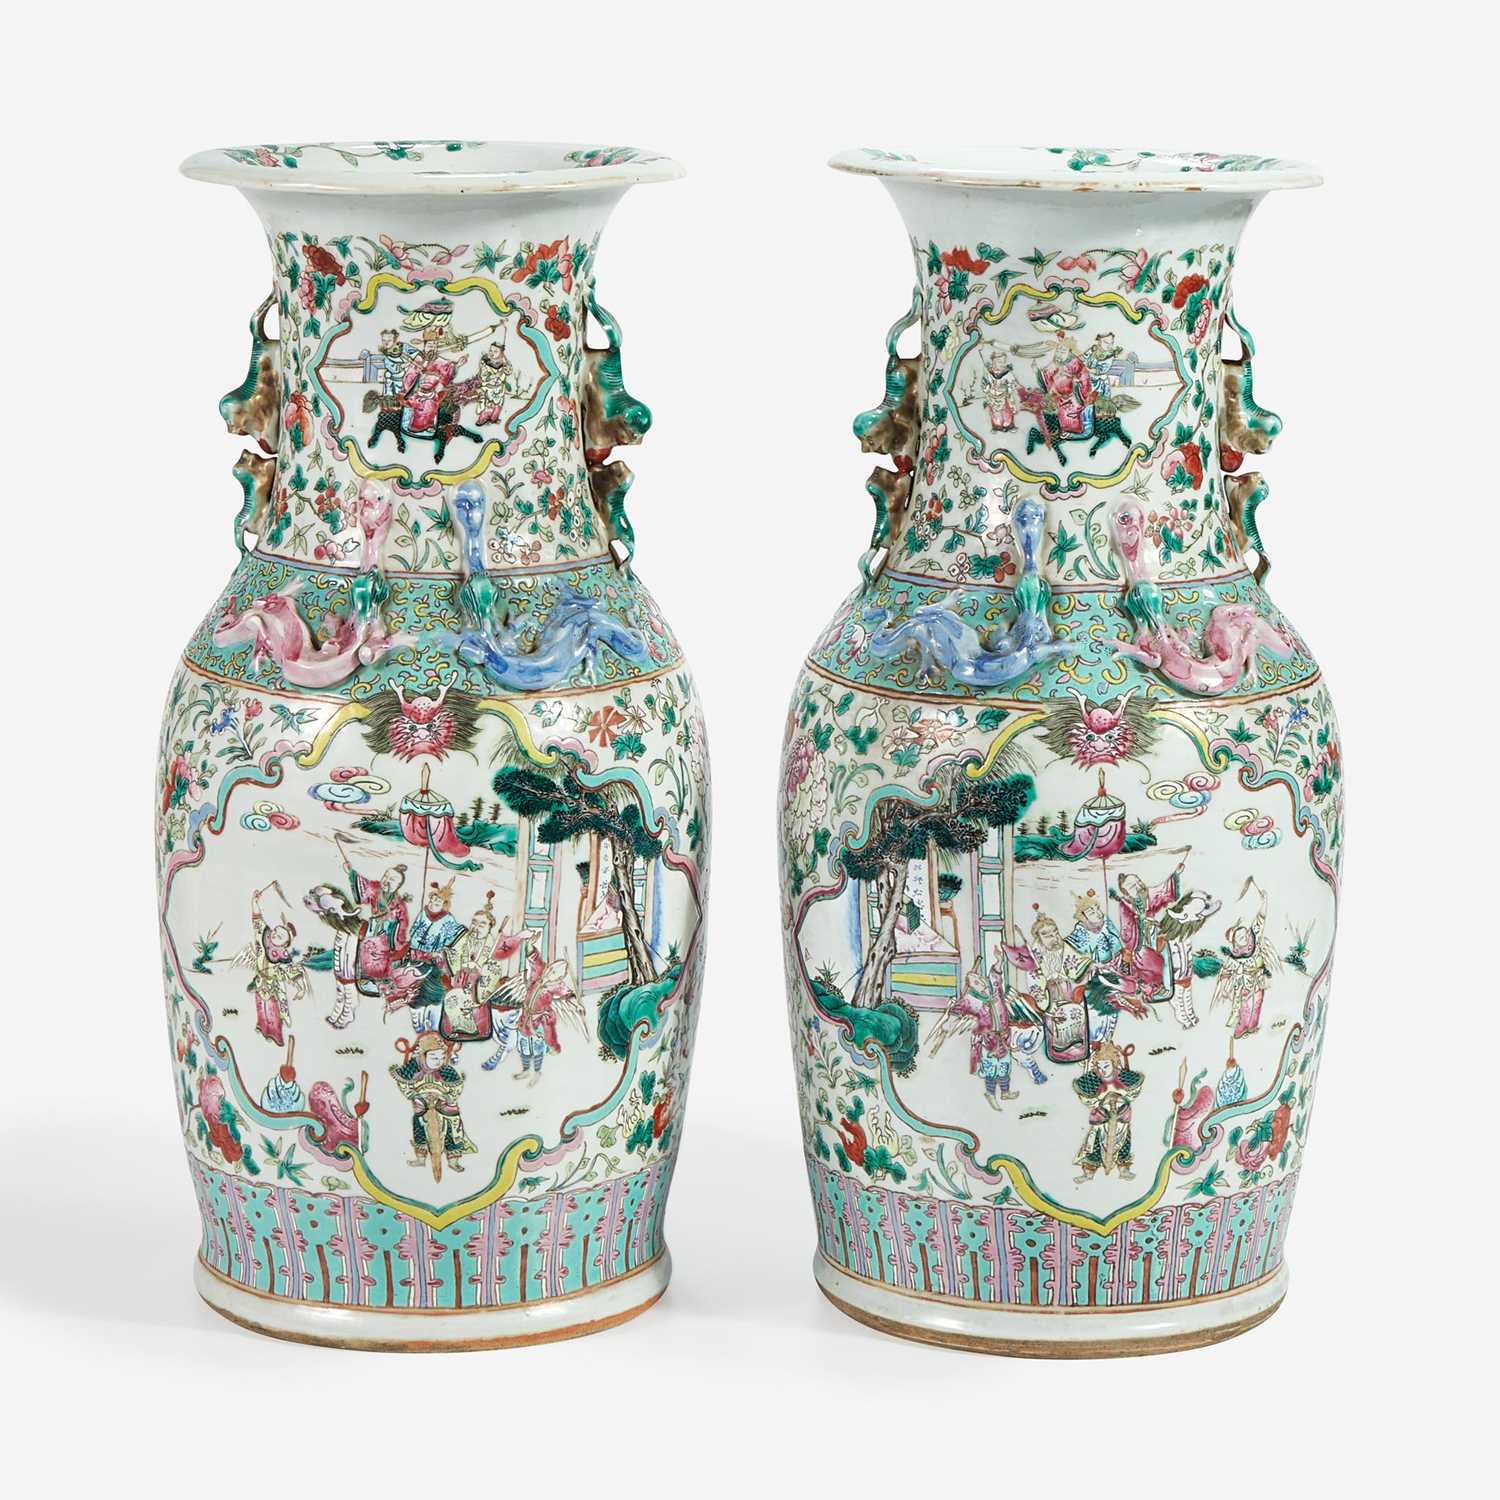 Lot 76 - A pair of Chinese export famille rose-decorated porcelain baluster vases